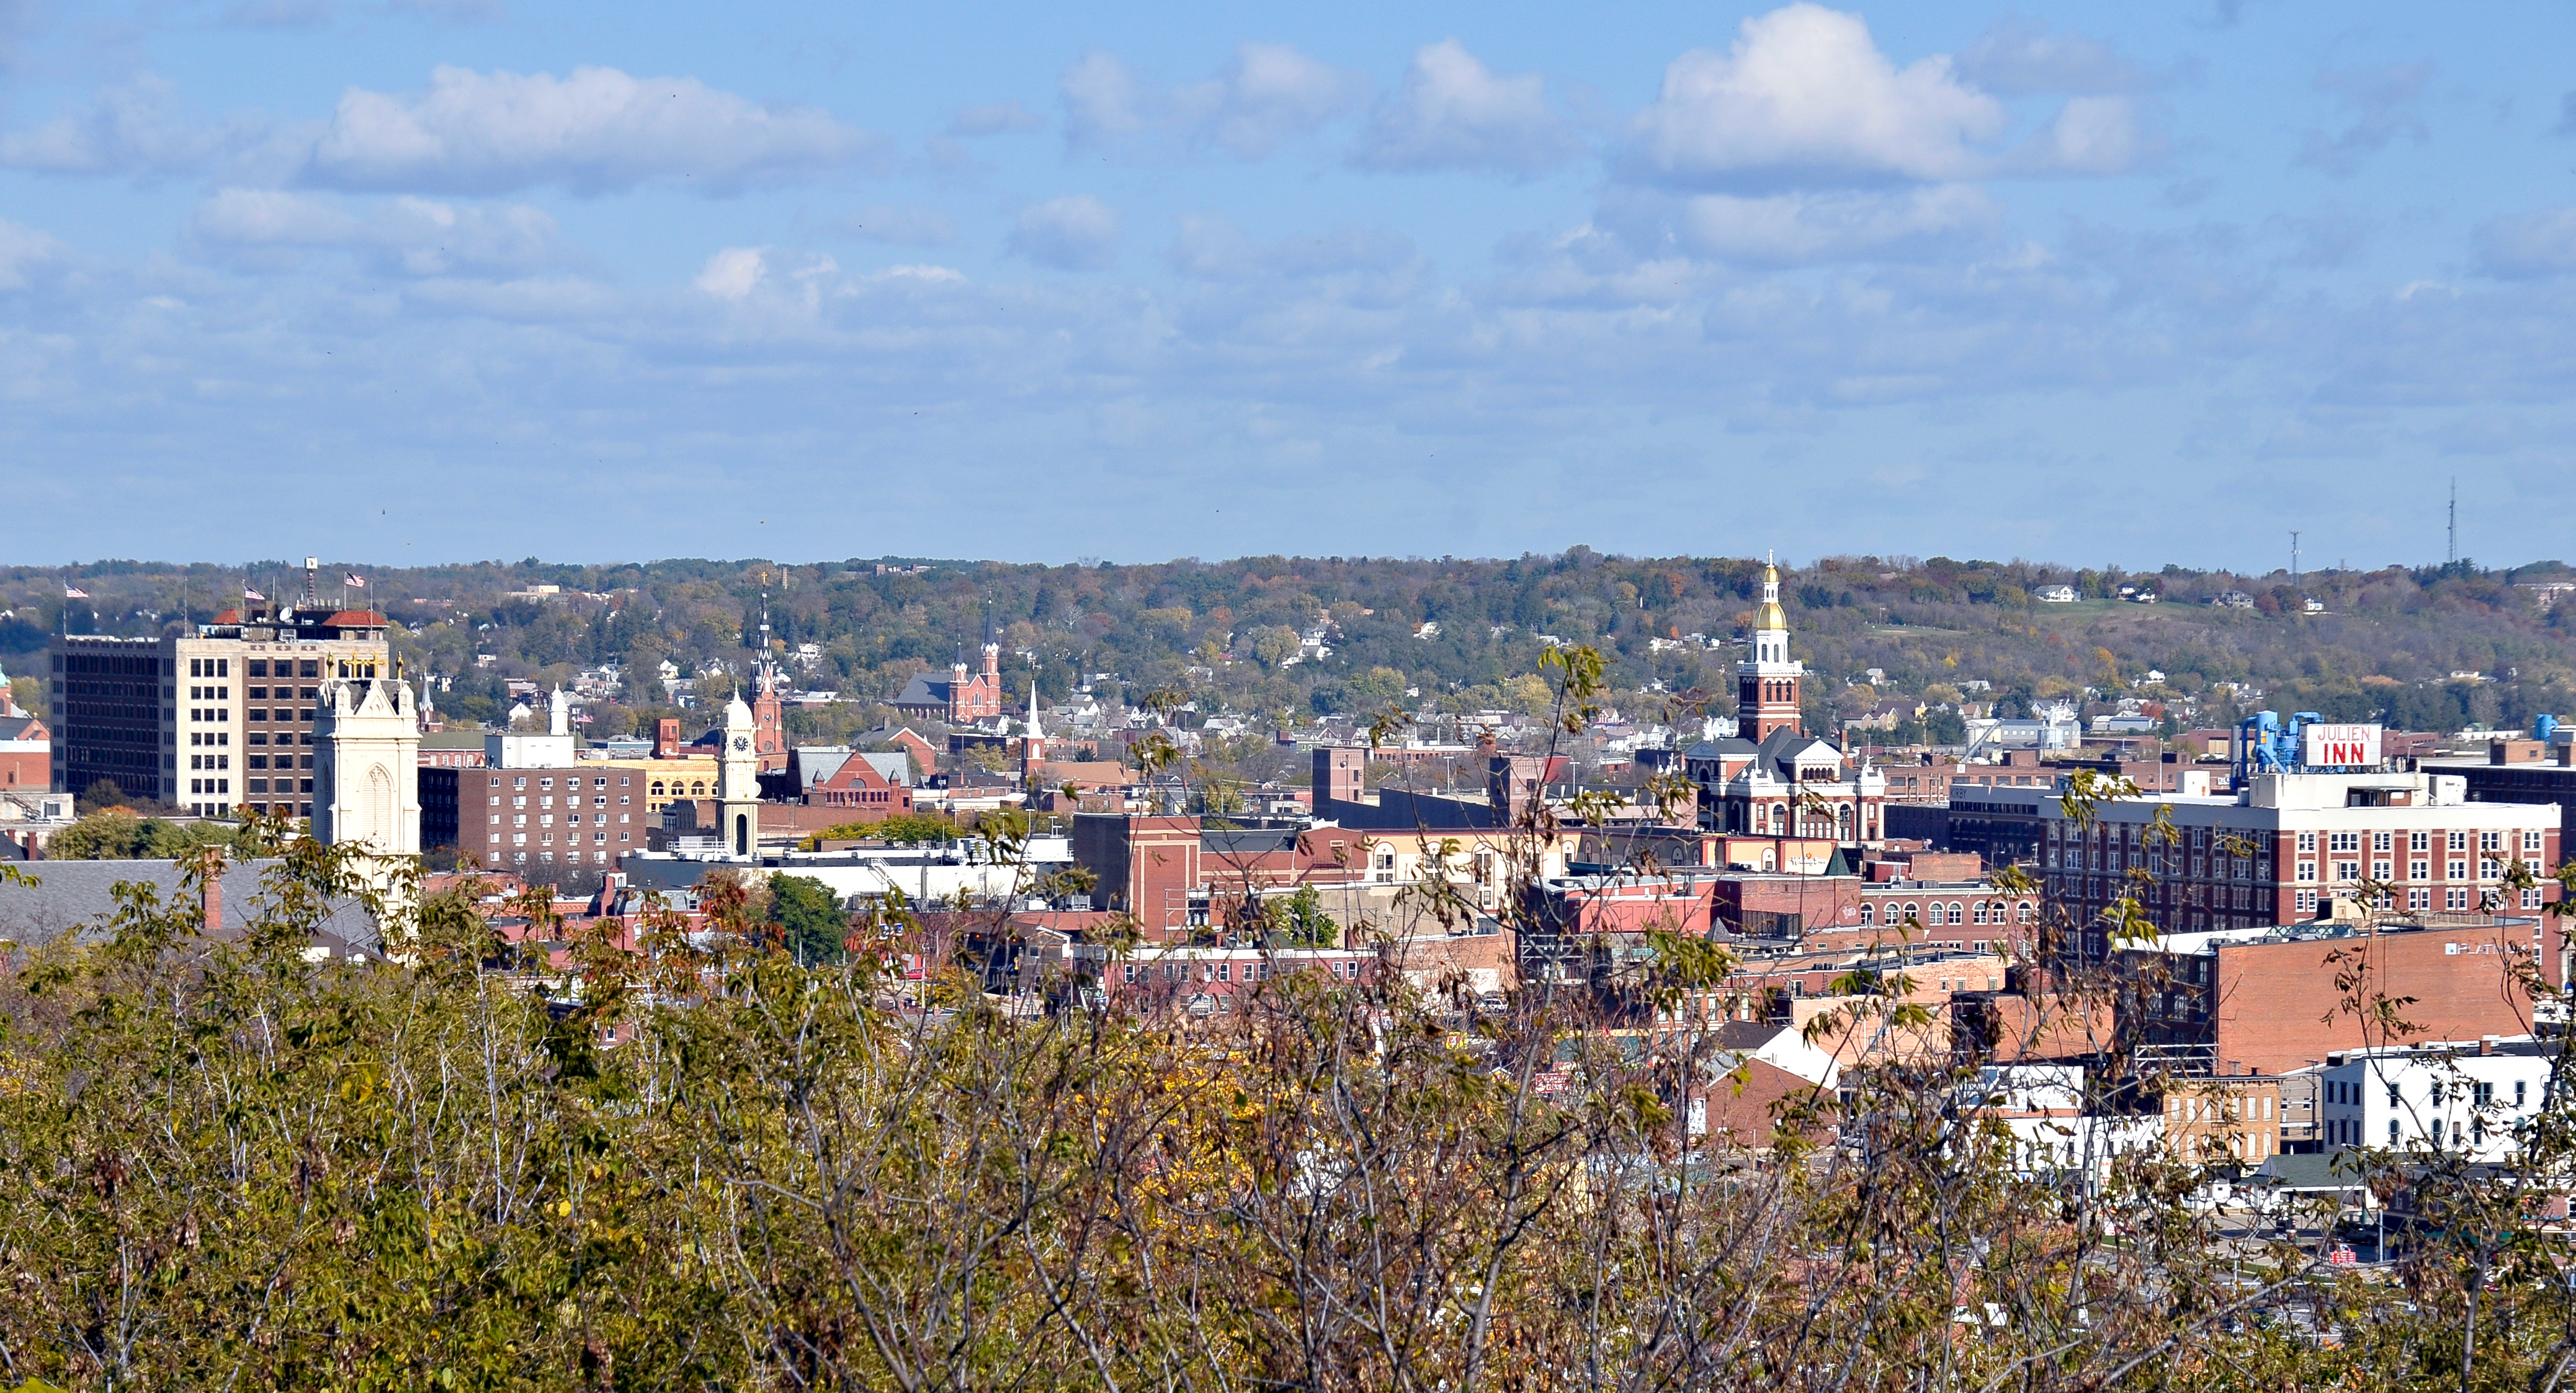 Dubuque IA overview Photo by Dirk (CC BY 2.0)